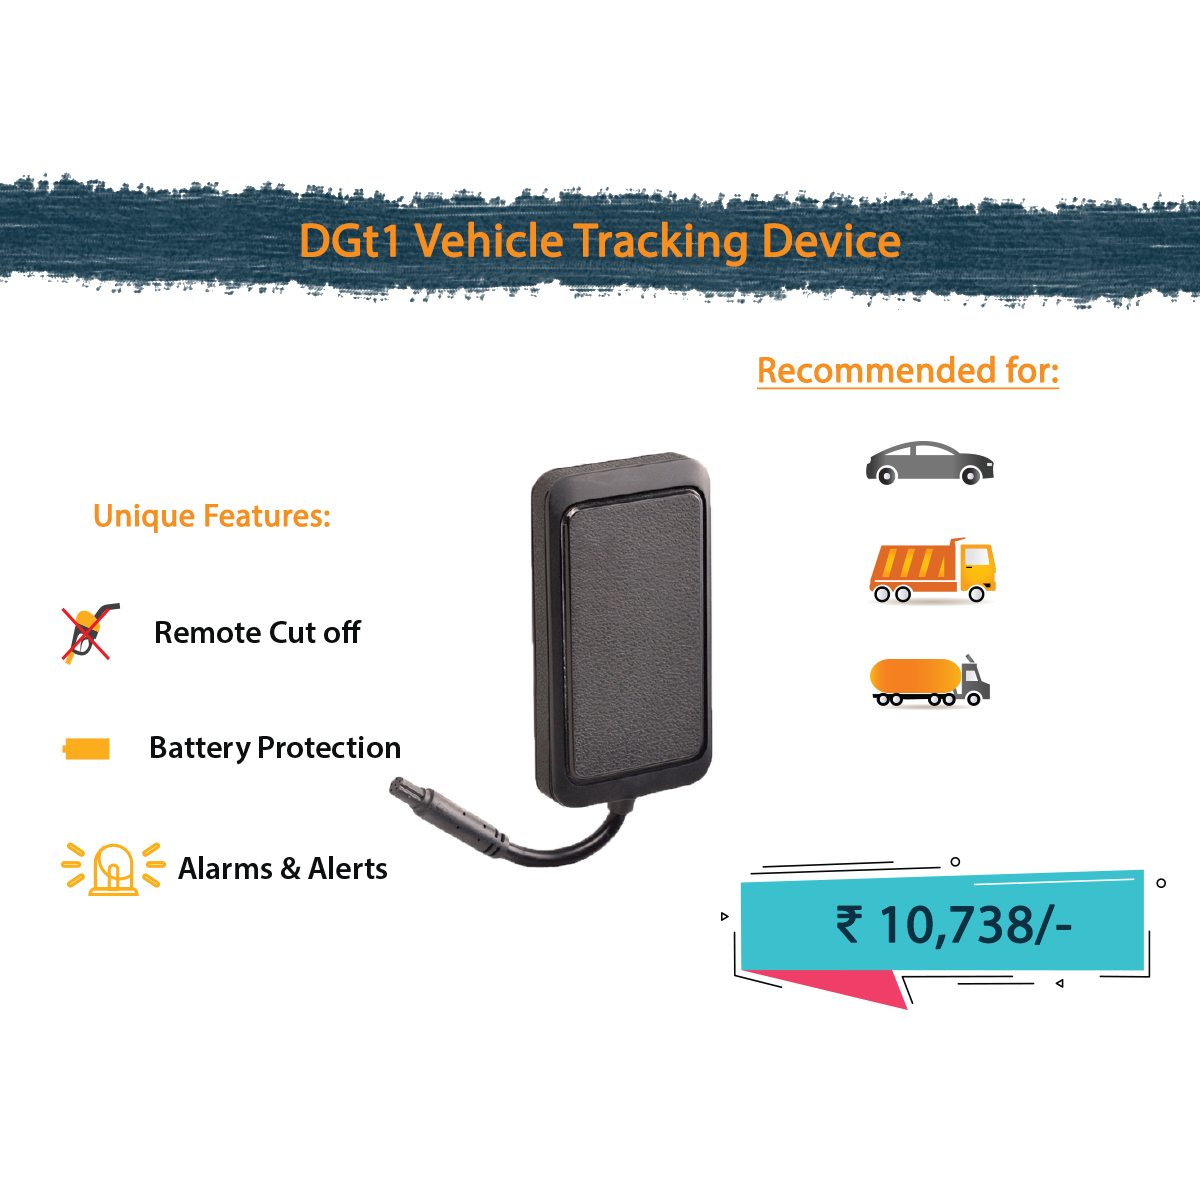 DGt1 - Vehicle Tracking Device